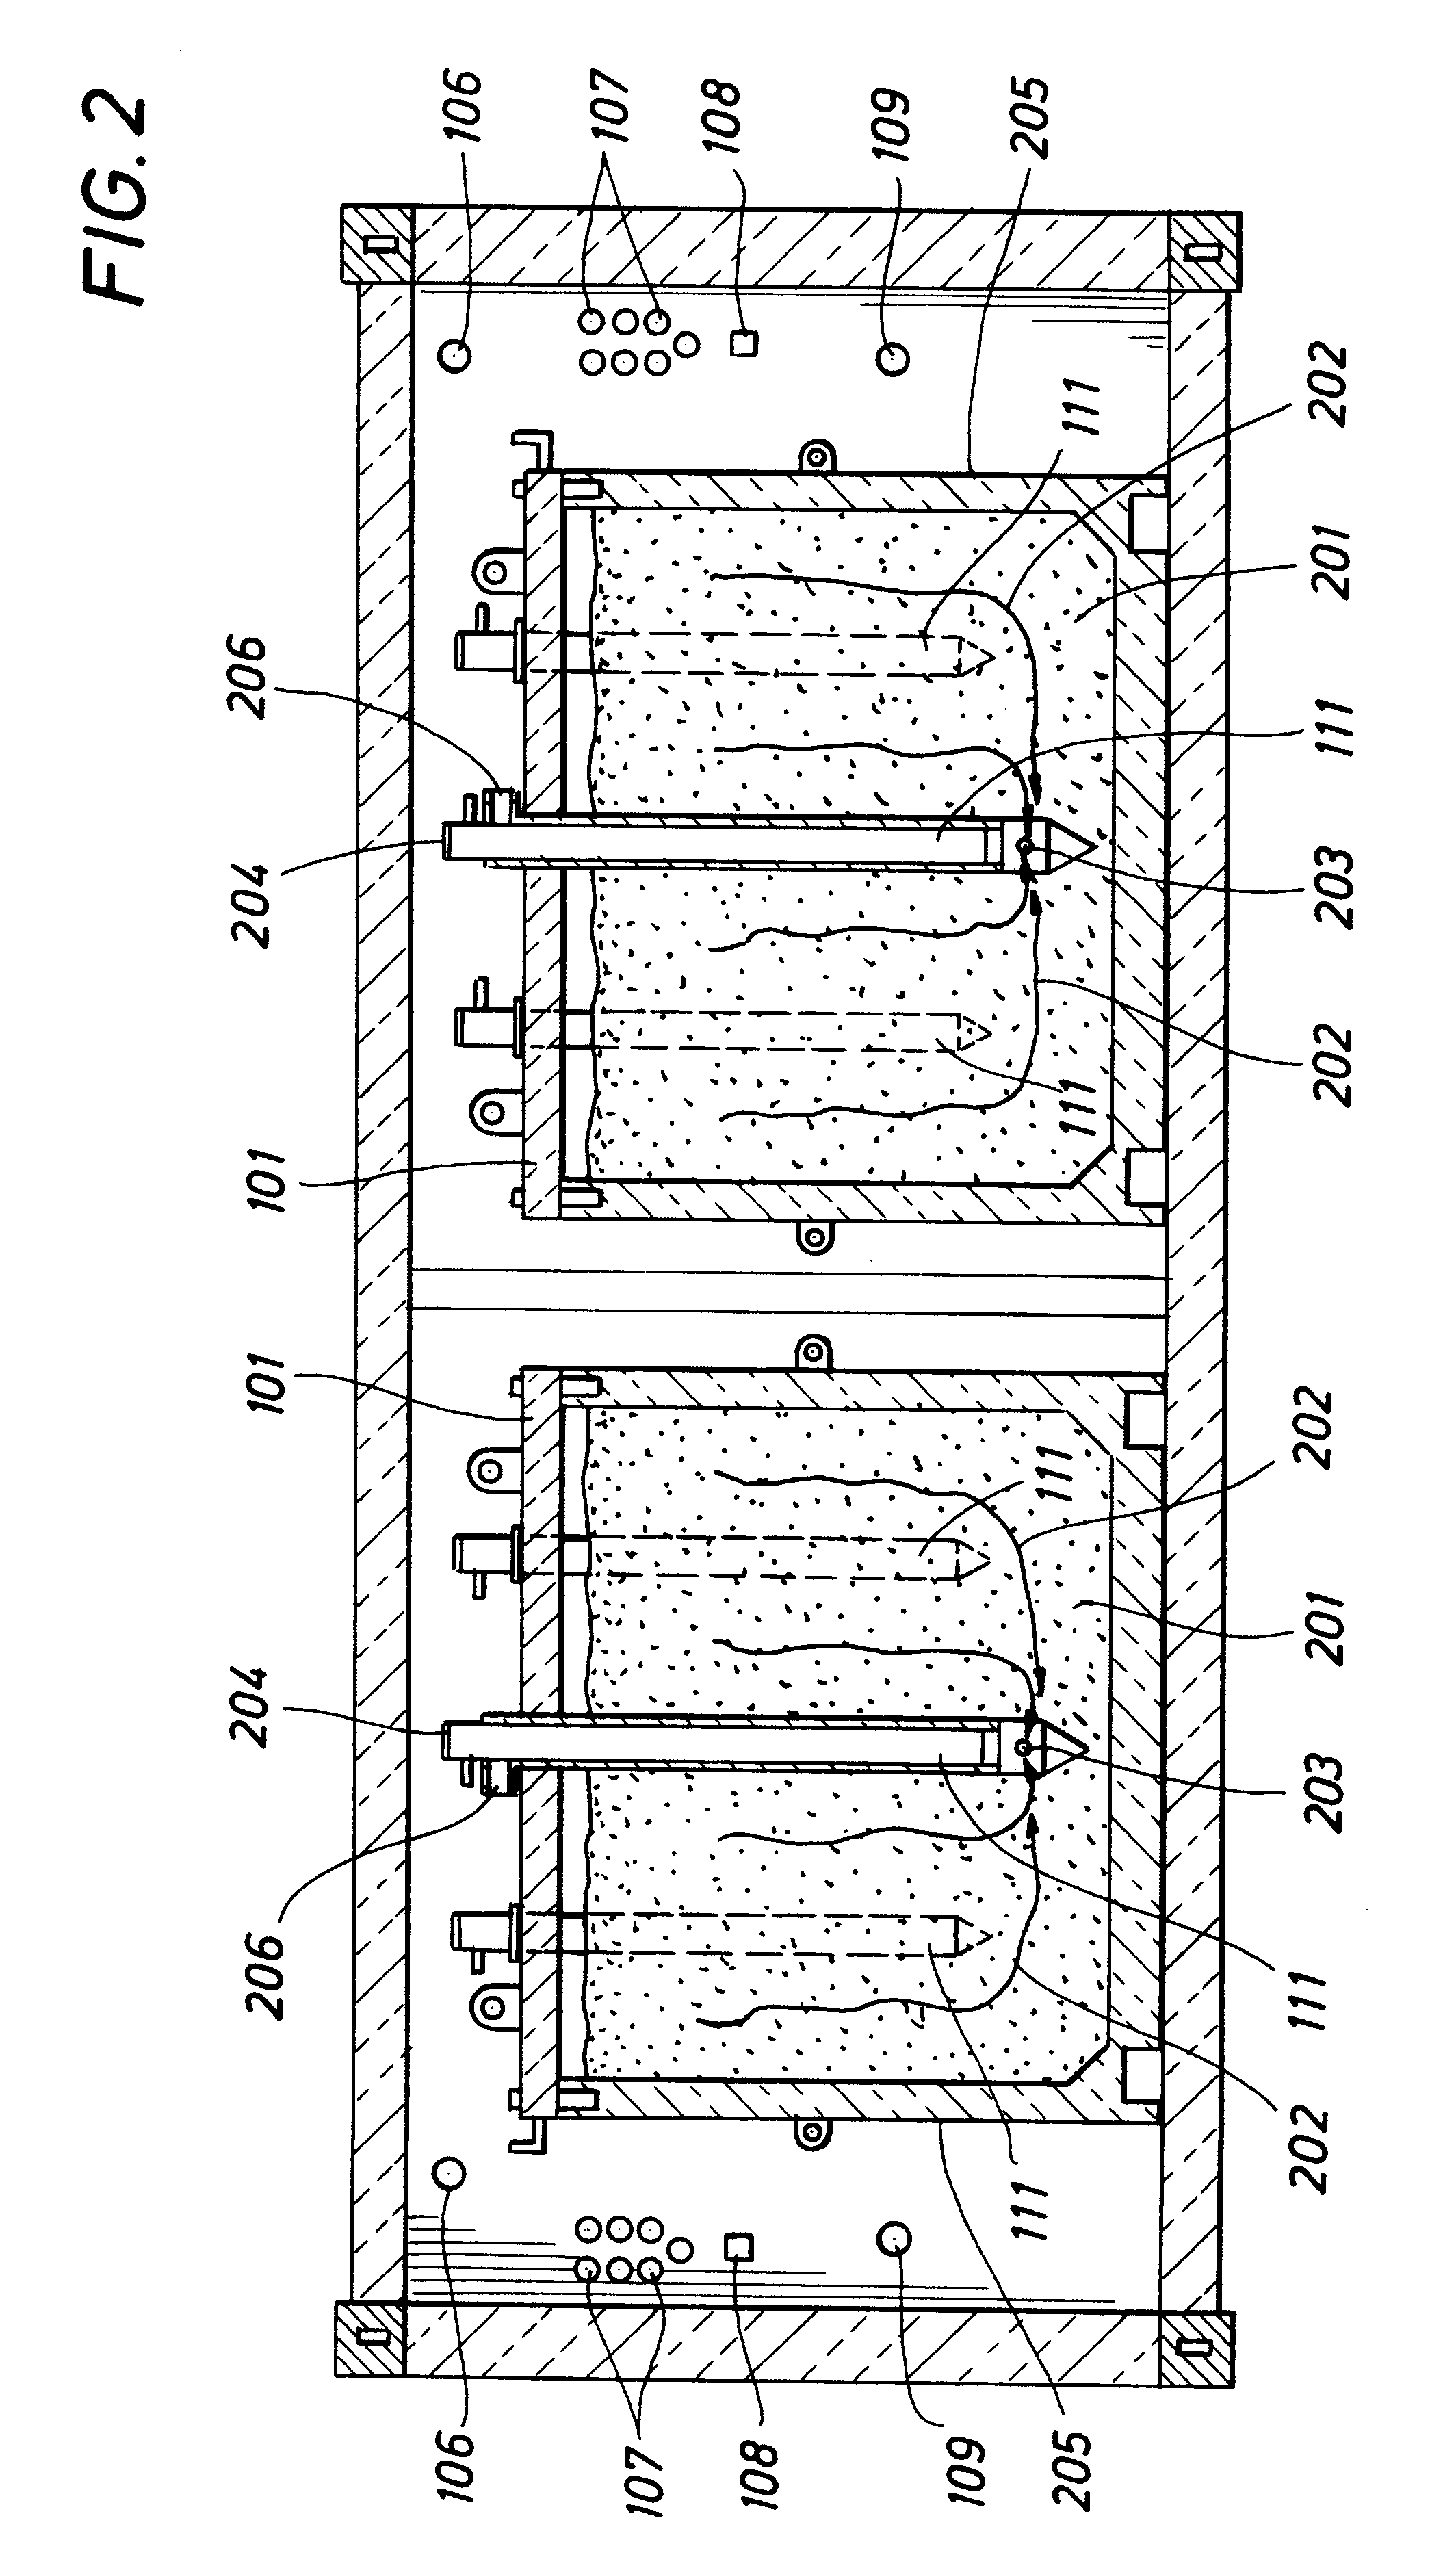 Apparatus for exsitu thermal remediation